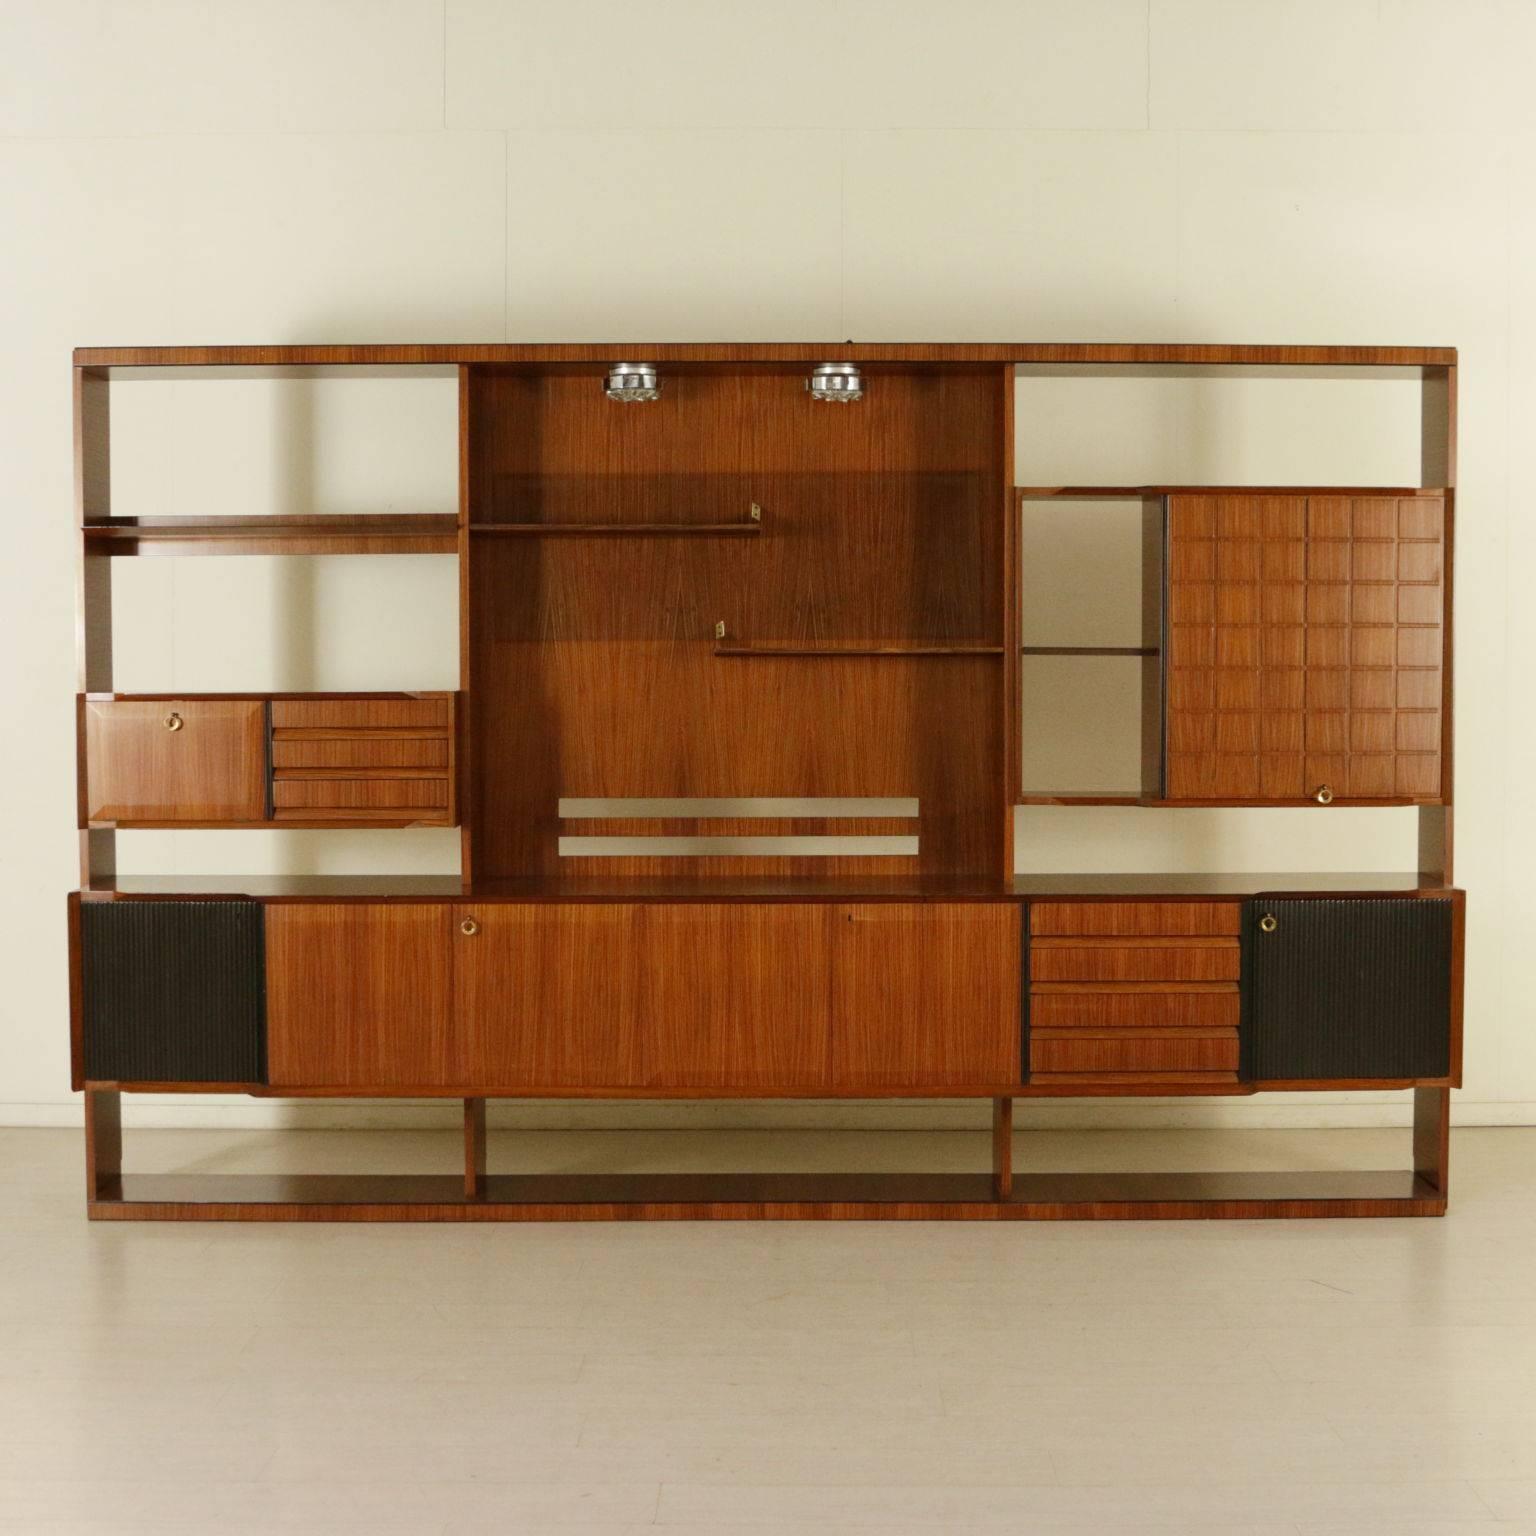 A living room cabinet with compartments, hinged doors, drawers, open shelves. Rosewood veneer, ebony stained and decorated panels, ceiling lamps. Manufactured in Italy, 1960s.